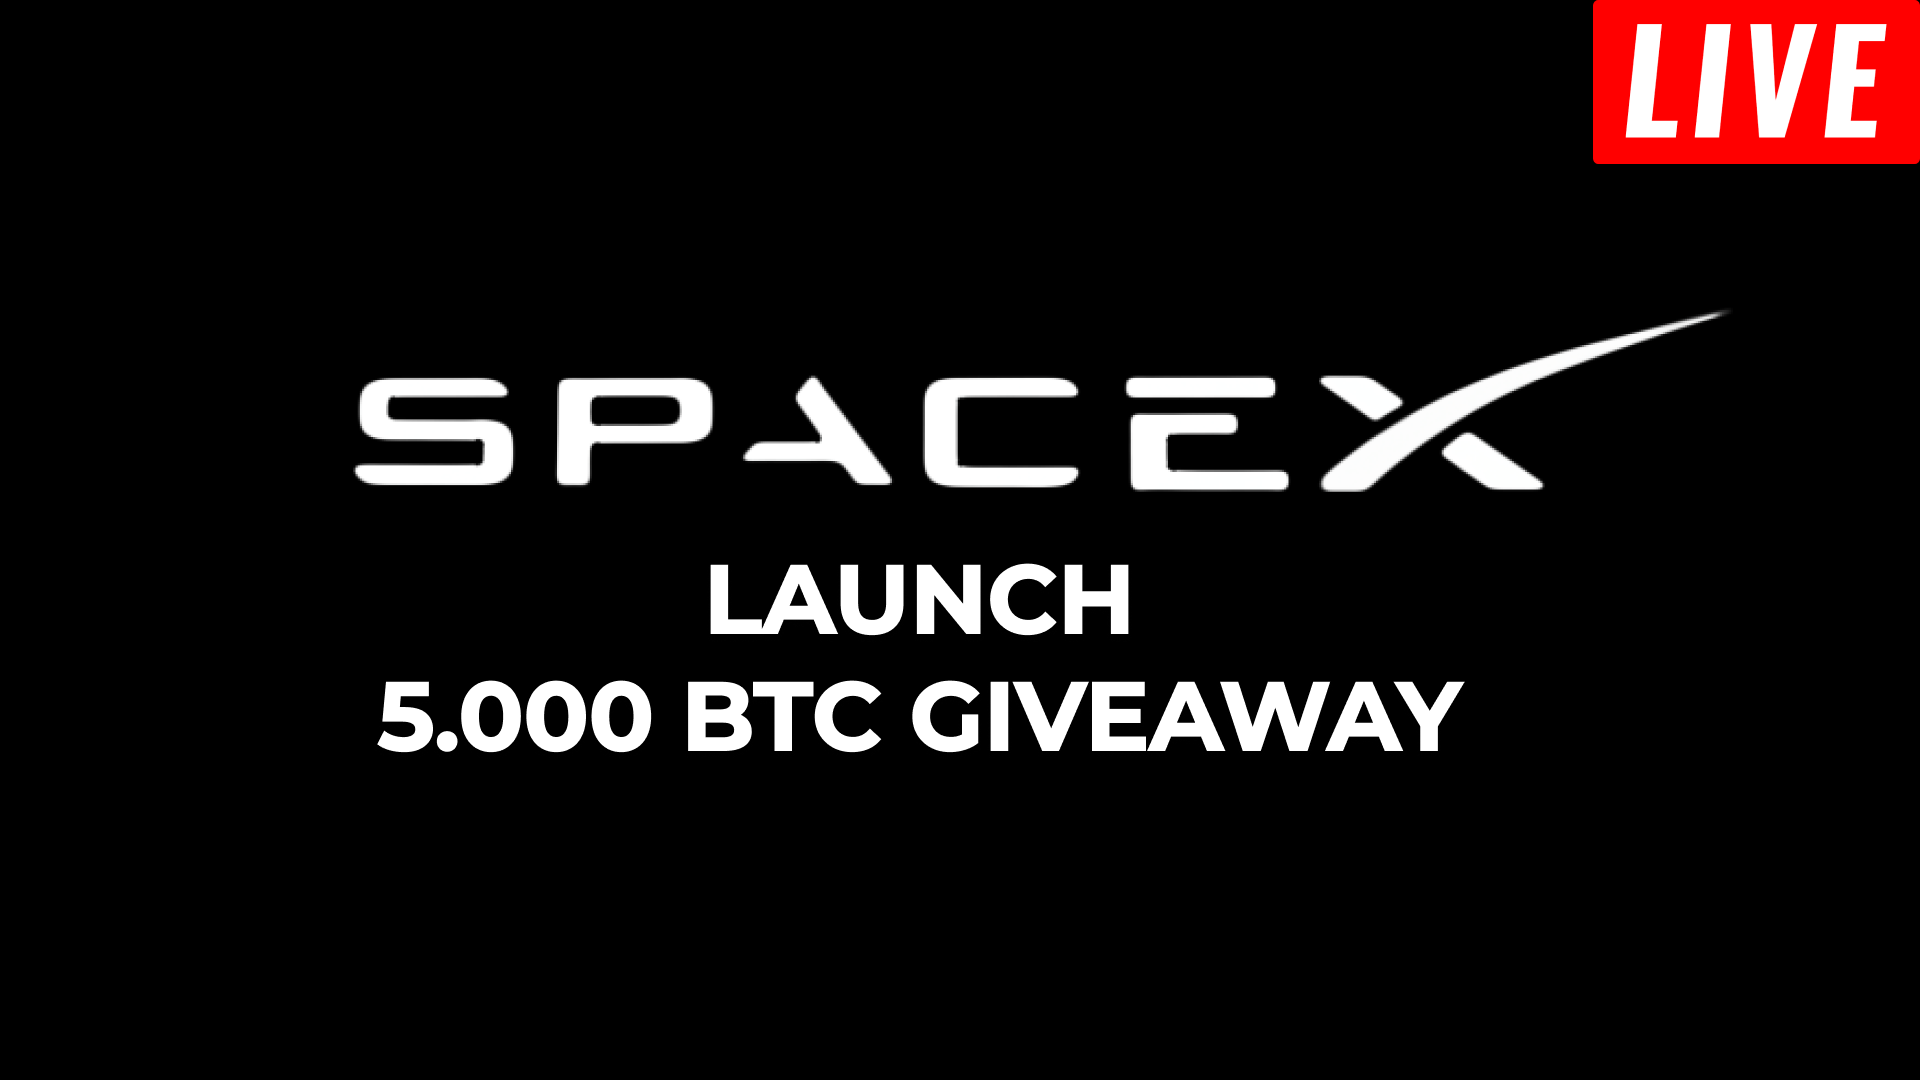 SpaceX Foundation 5,000 Bitcoin Giveaway Airdrop Telegraph